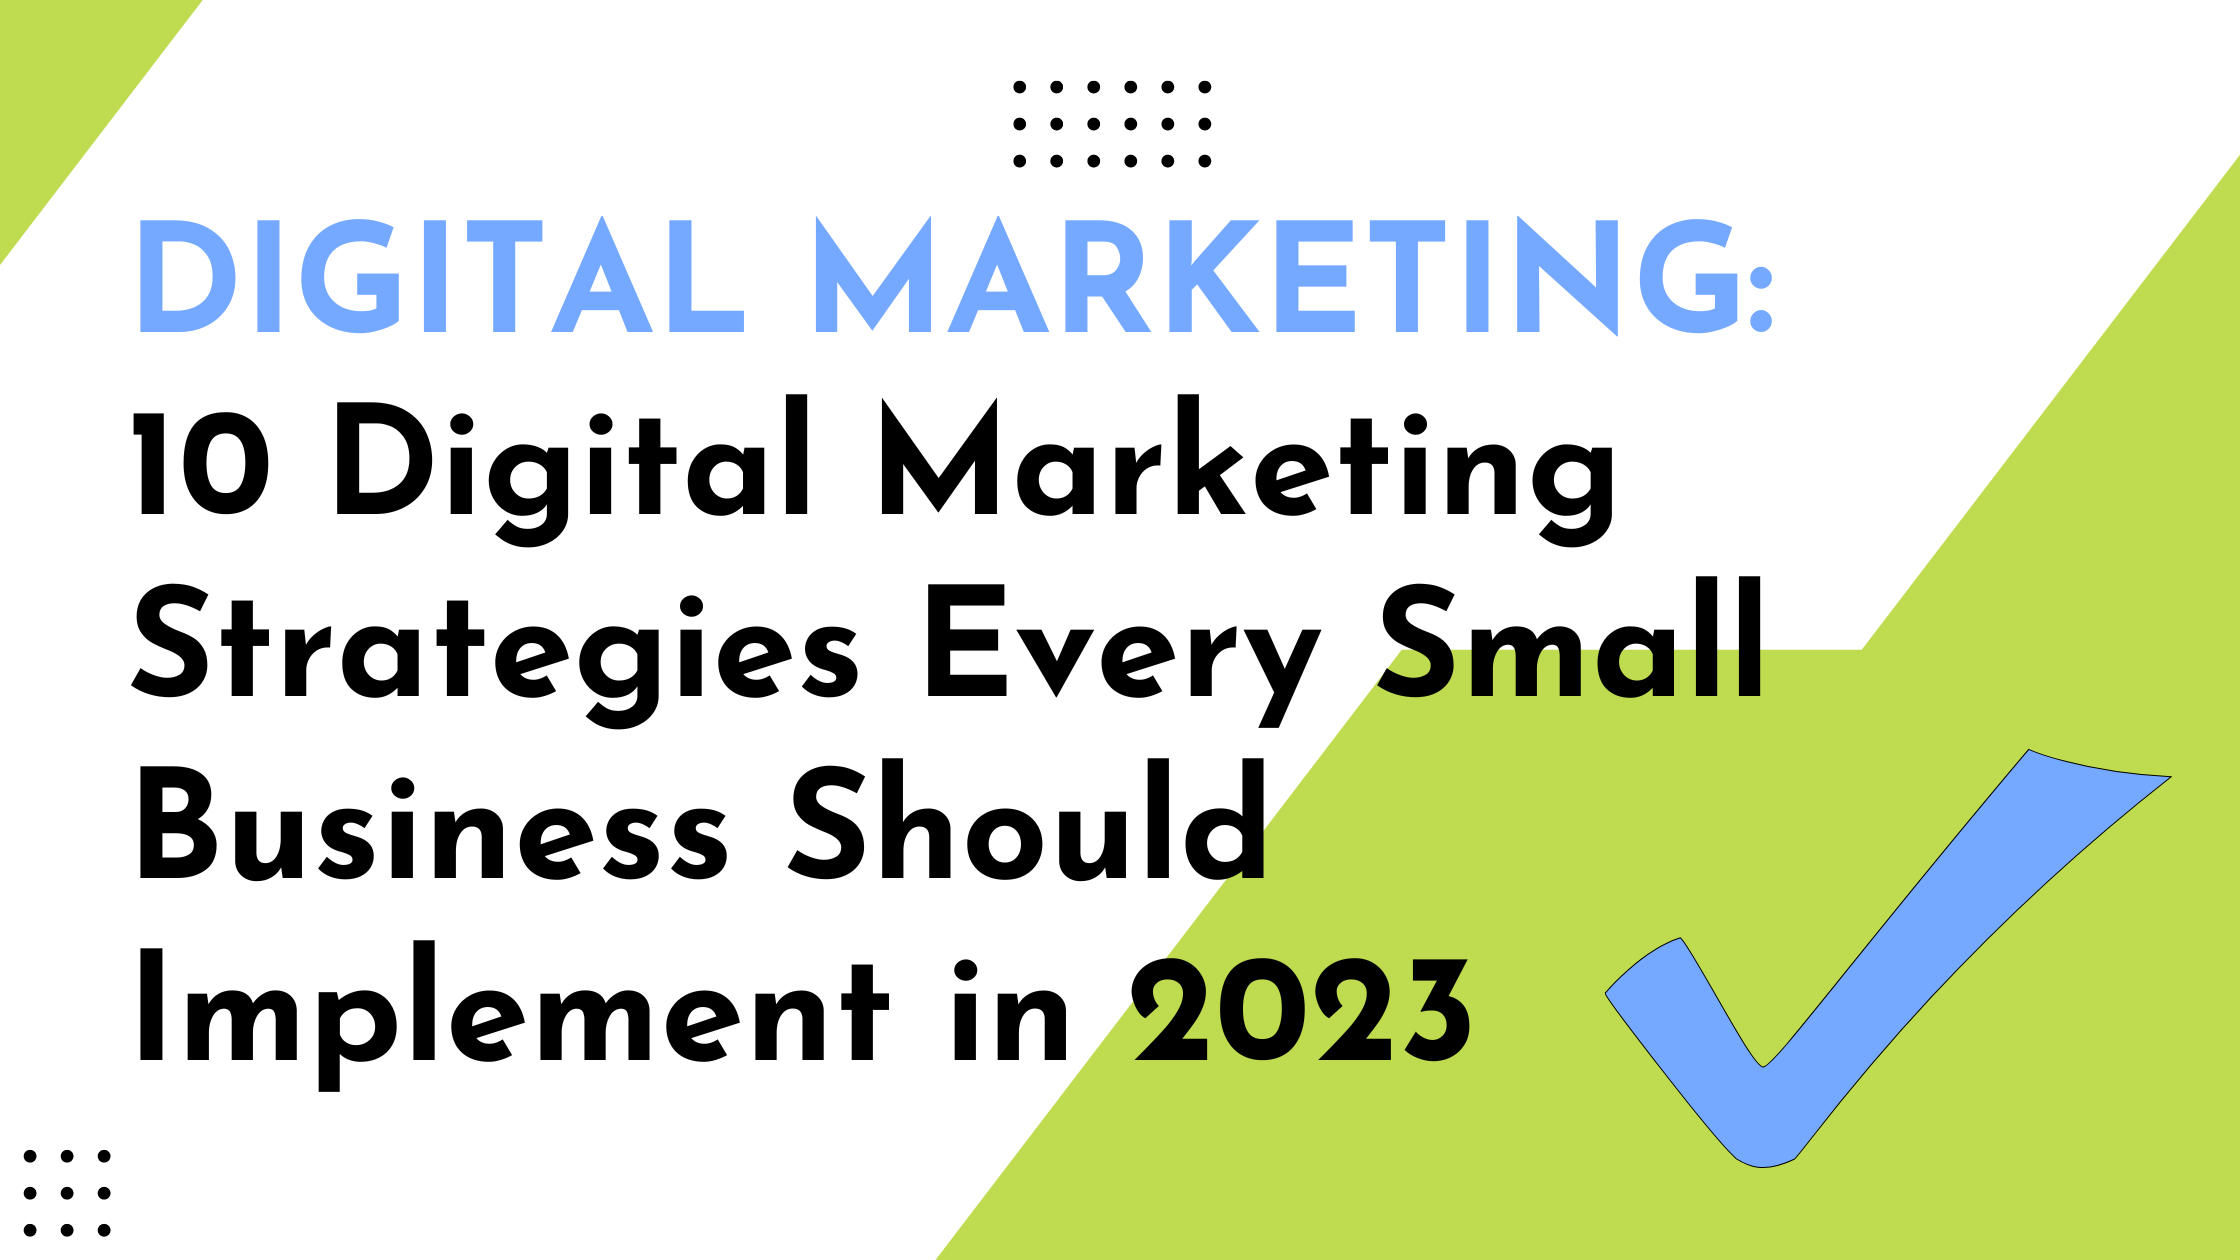 10-Digital-Marketing-Strategies-Every-Small-Business-Should-Implement-in-2023-Tribal-Media.png